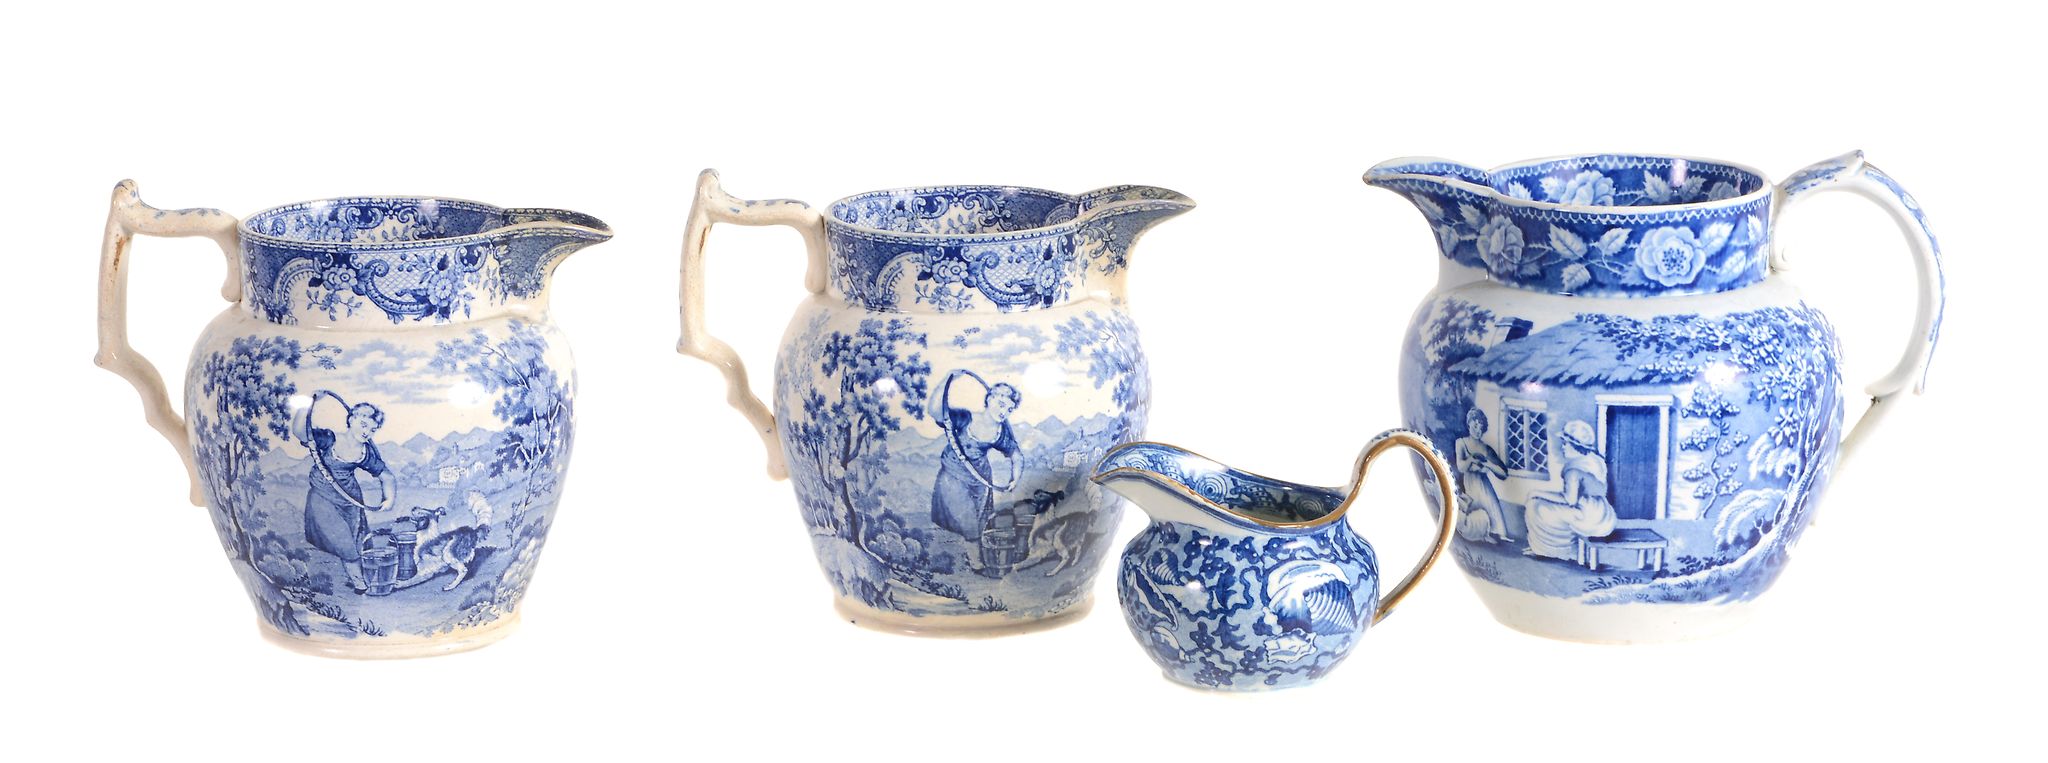 Four various British blue and printed pottery jugs, first quarter 19th century  Four various British